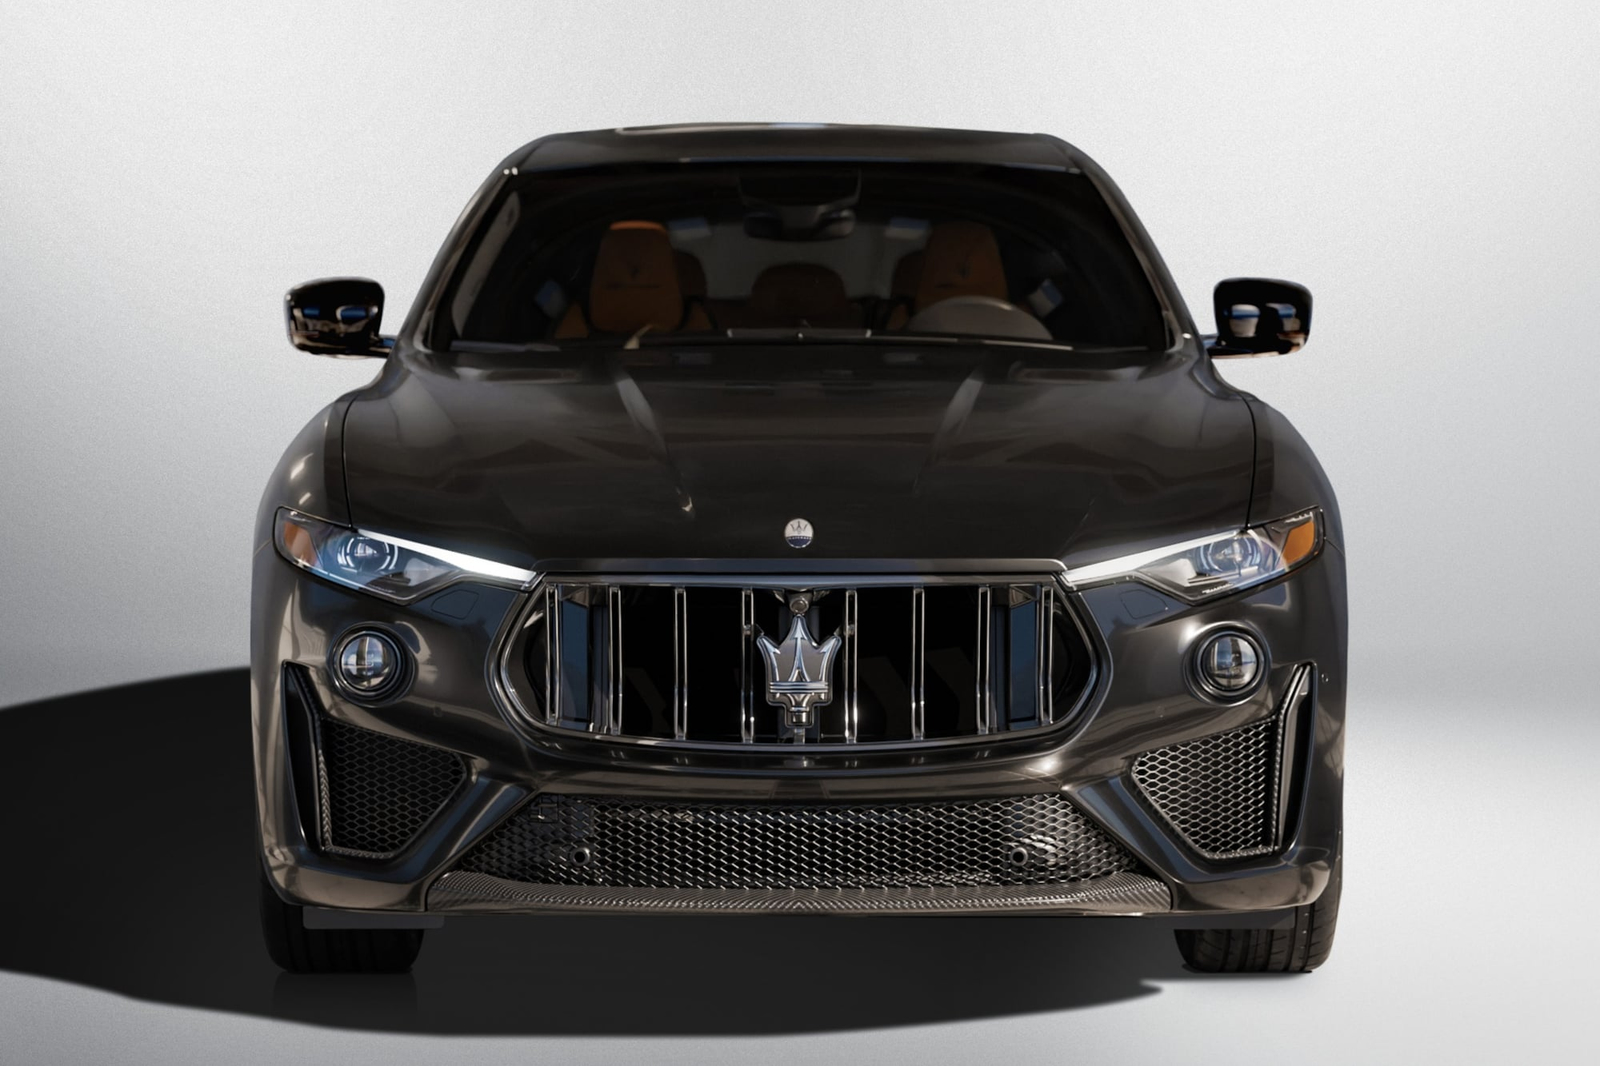 sports cars, luxury, maserati ghibli and levante ultima models are the perfect way to say goodbye to the v8